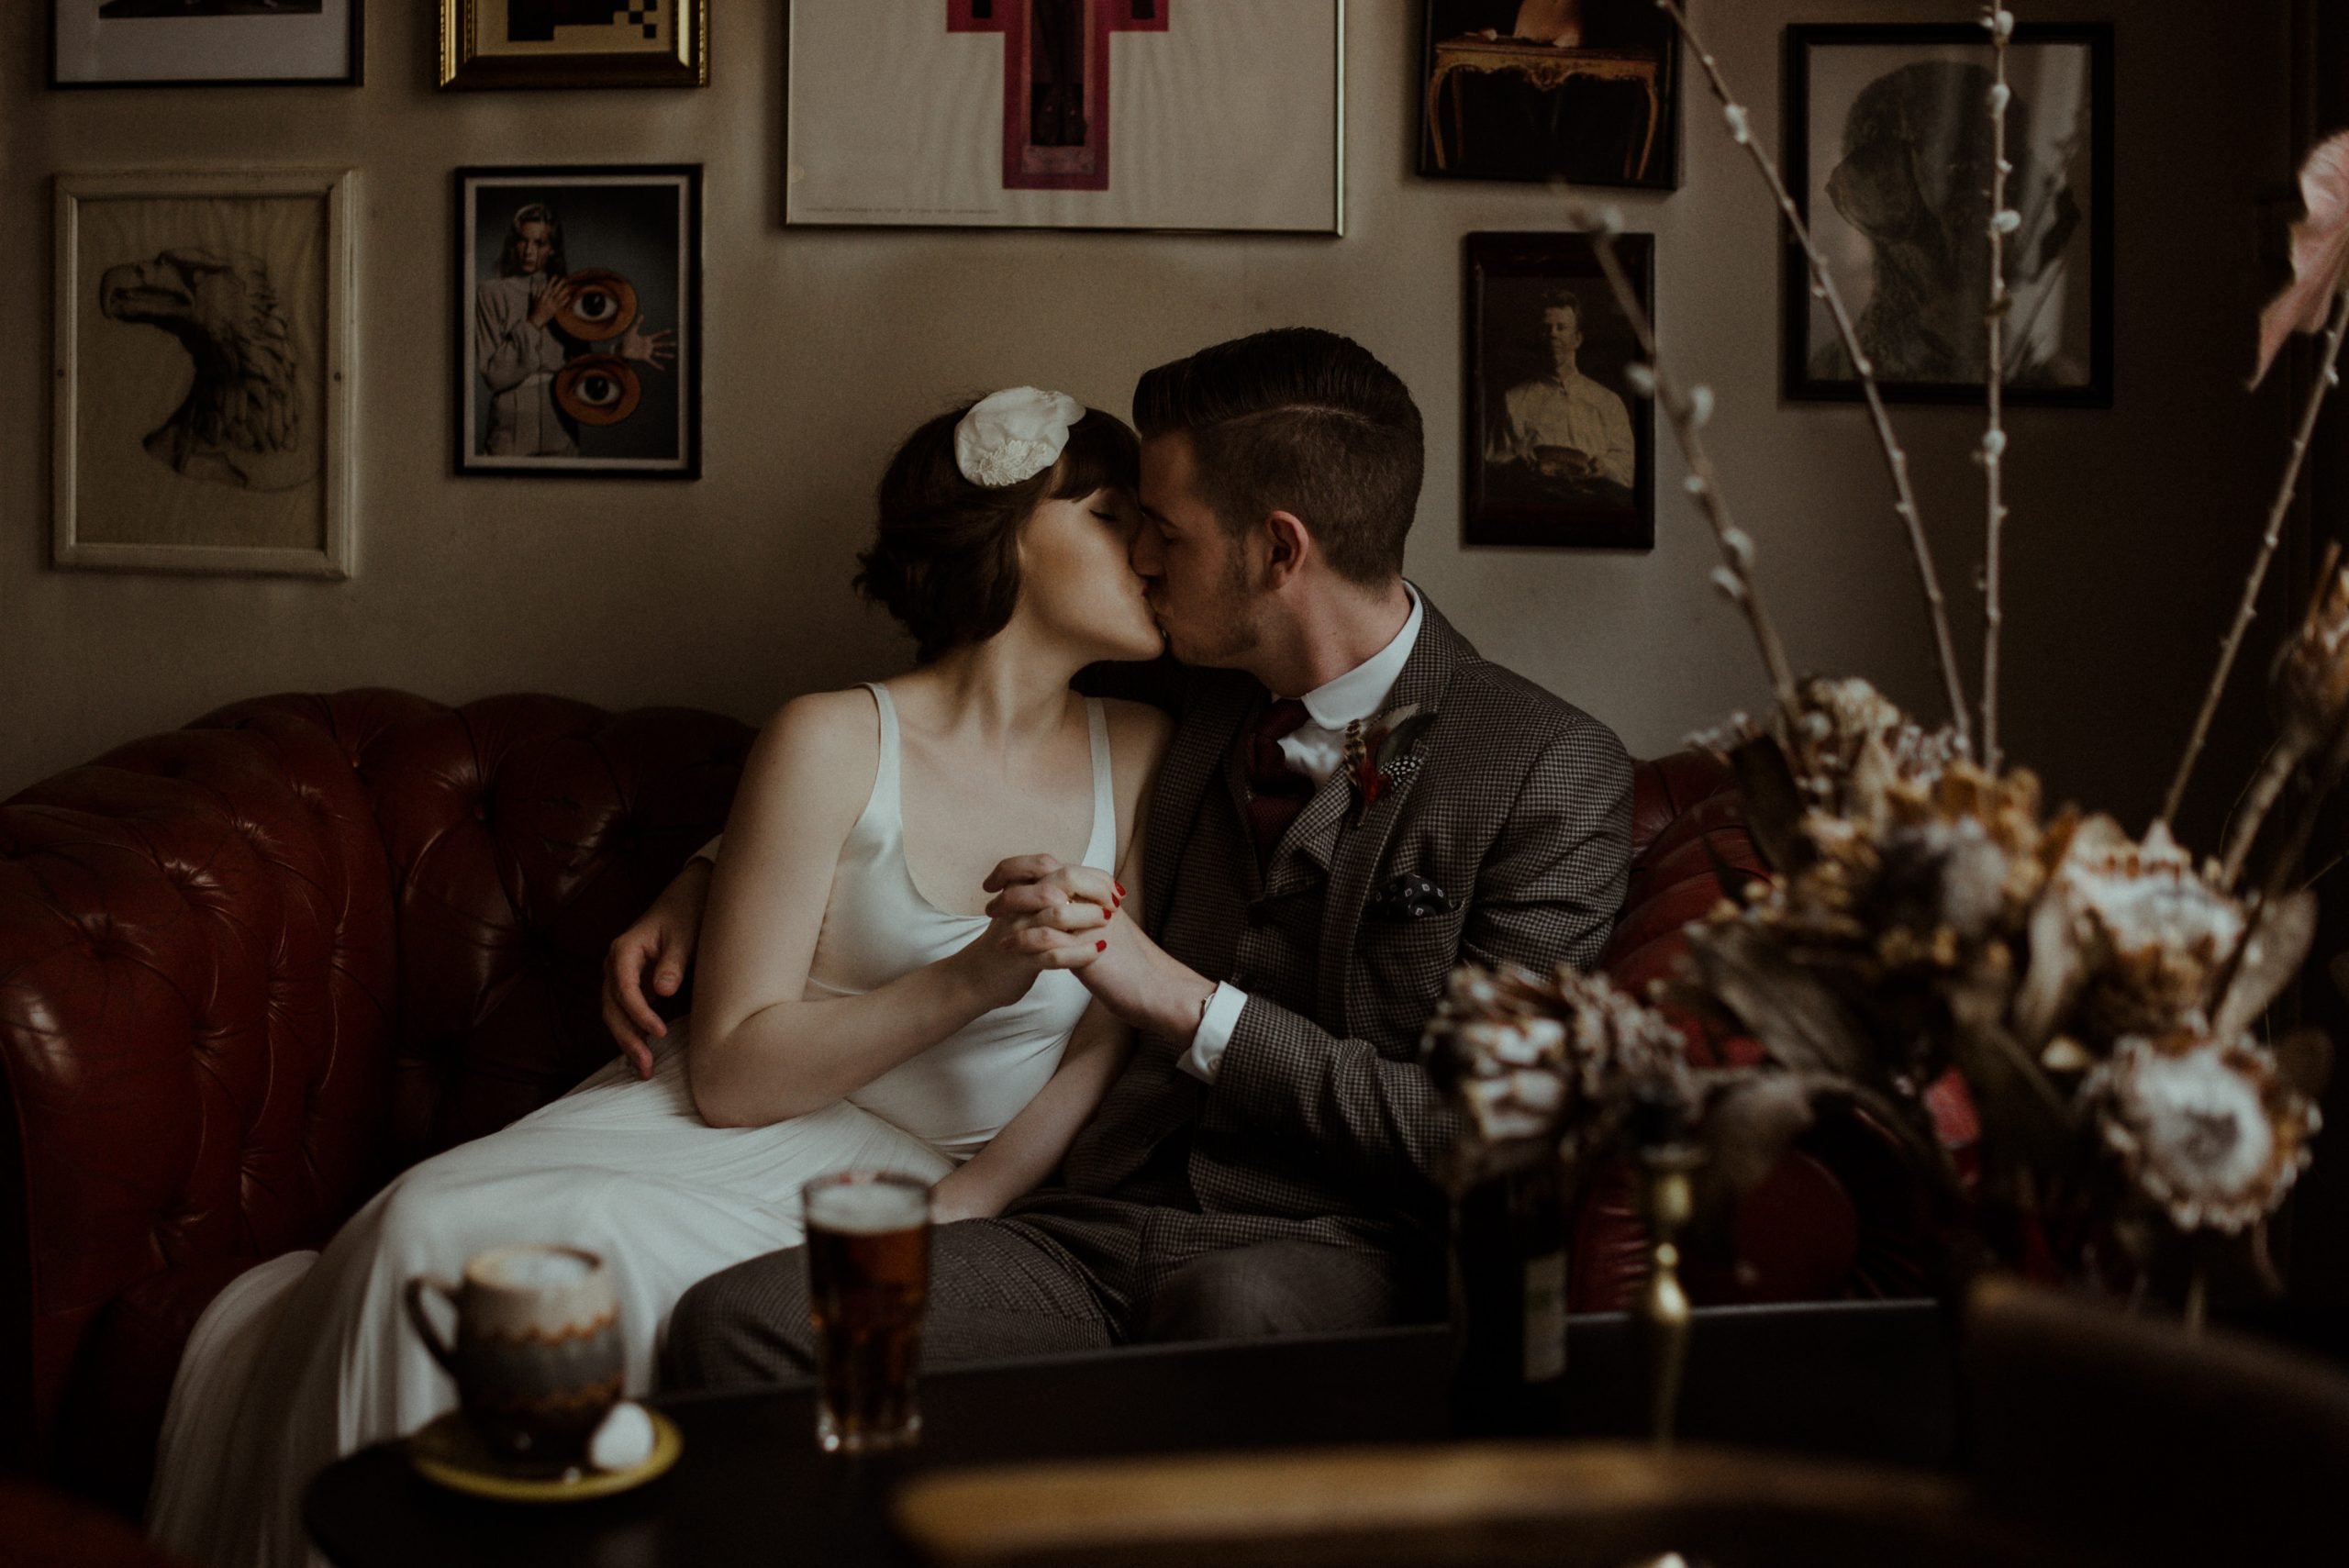 wedding photography editing tips for beginners